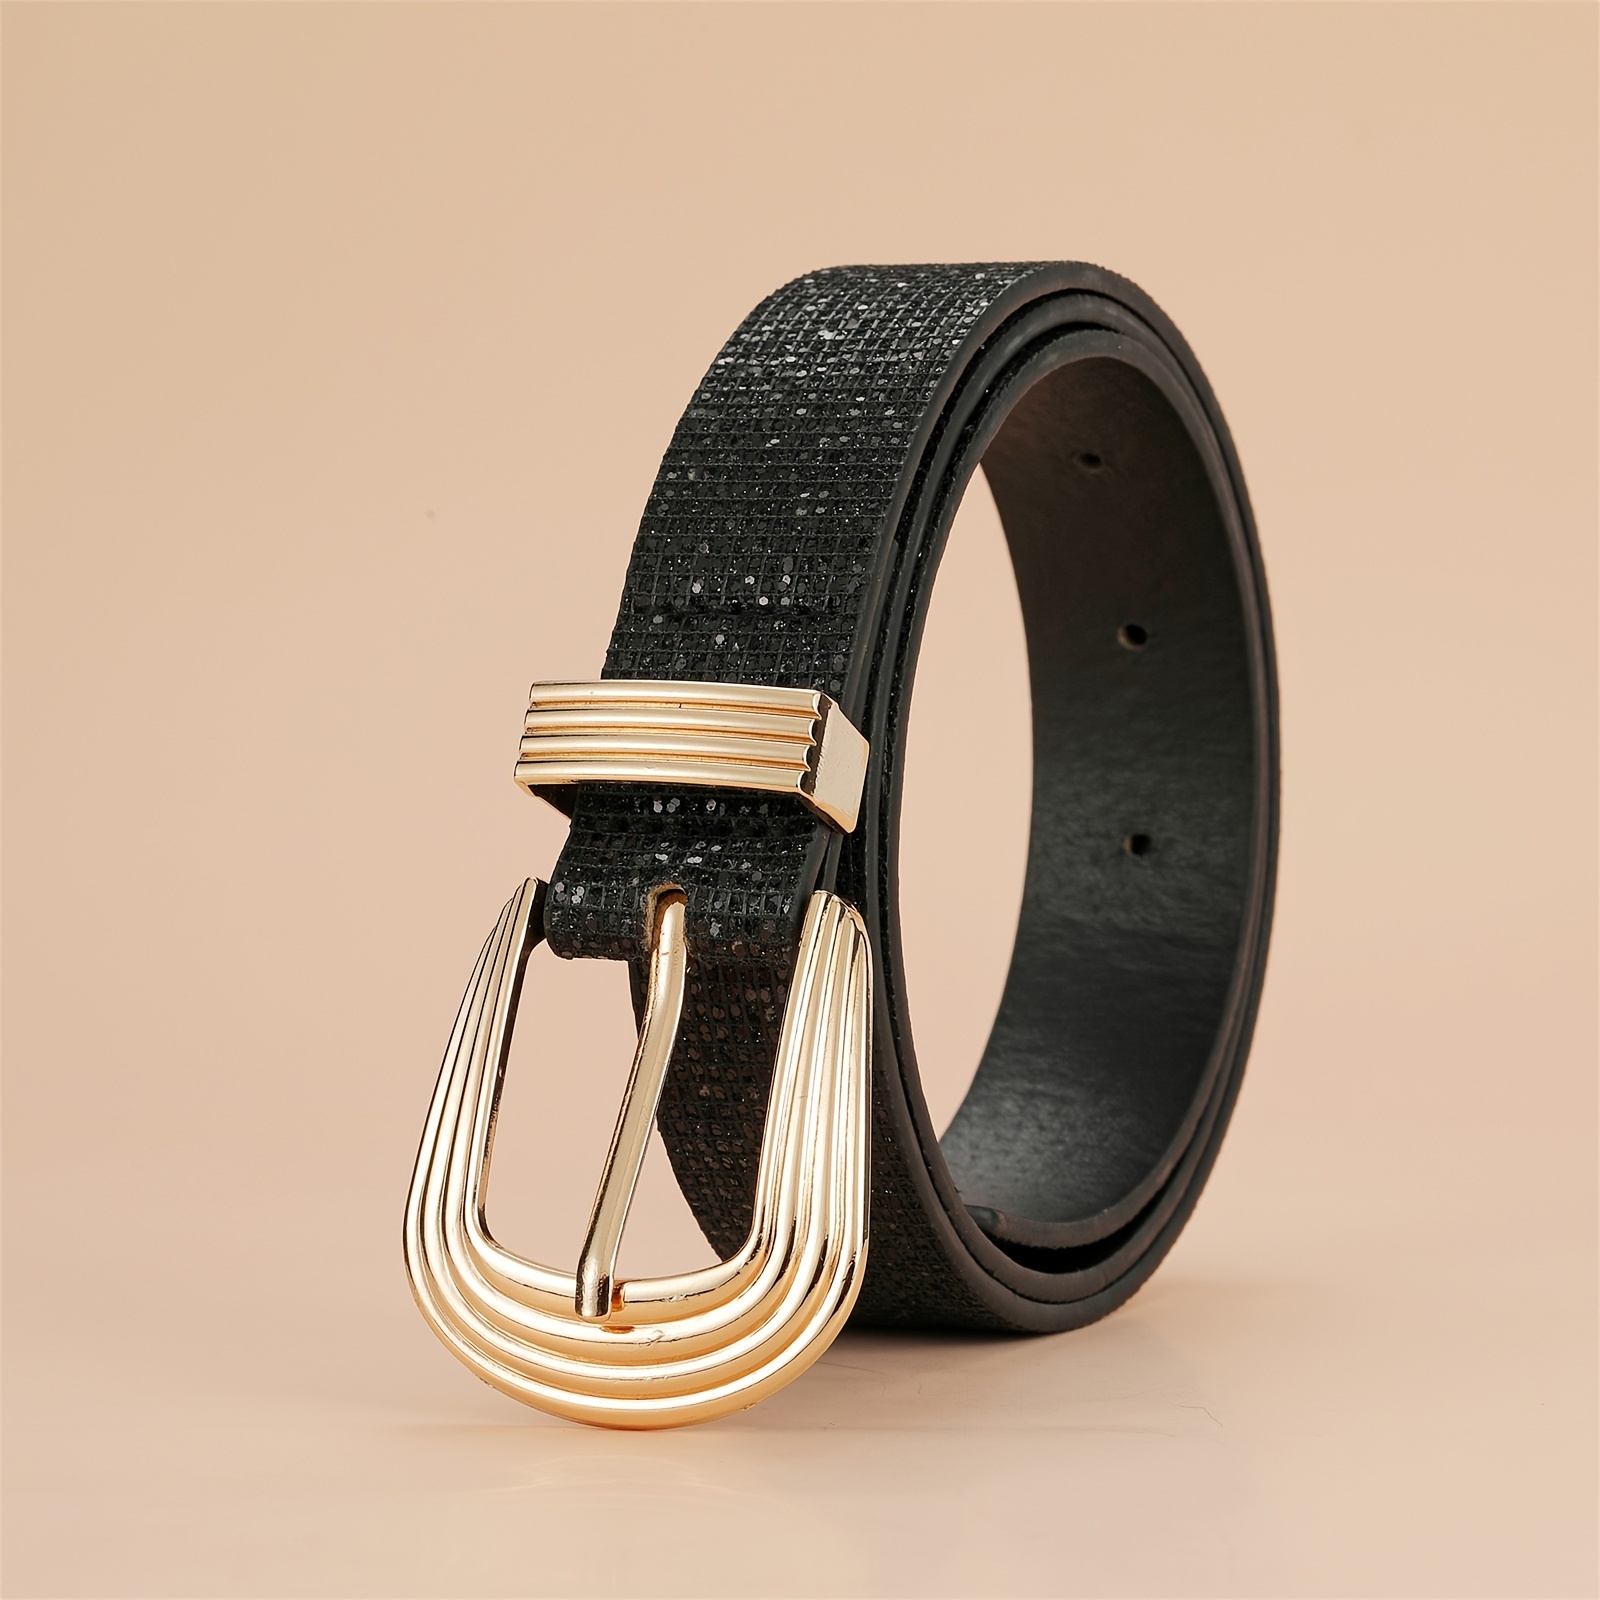 Ladies Fashion Pin Buckle Belt Glitter Pu Leather Belt For Jeans Pants  Dress Waist Belt For Women Girls, Check Out Today's Deals Now